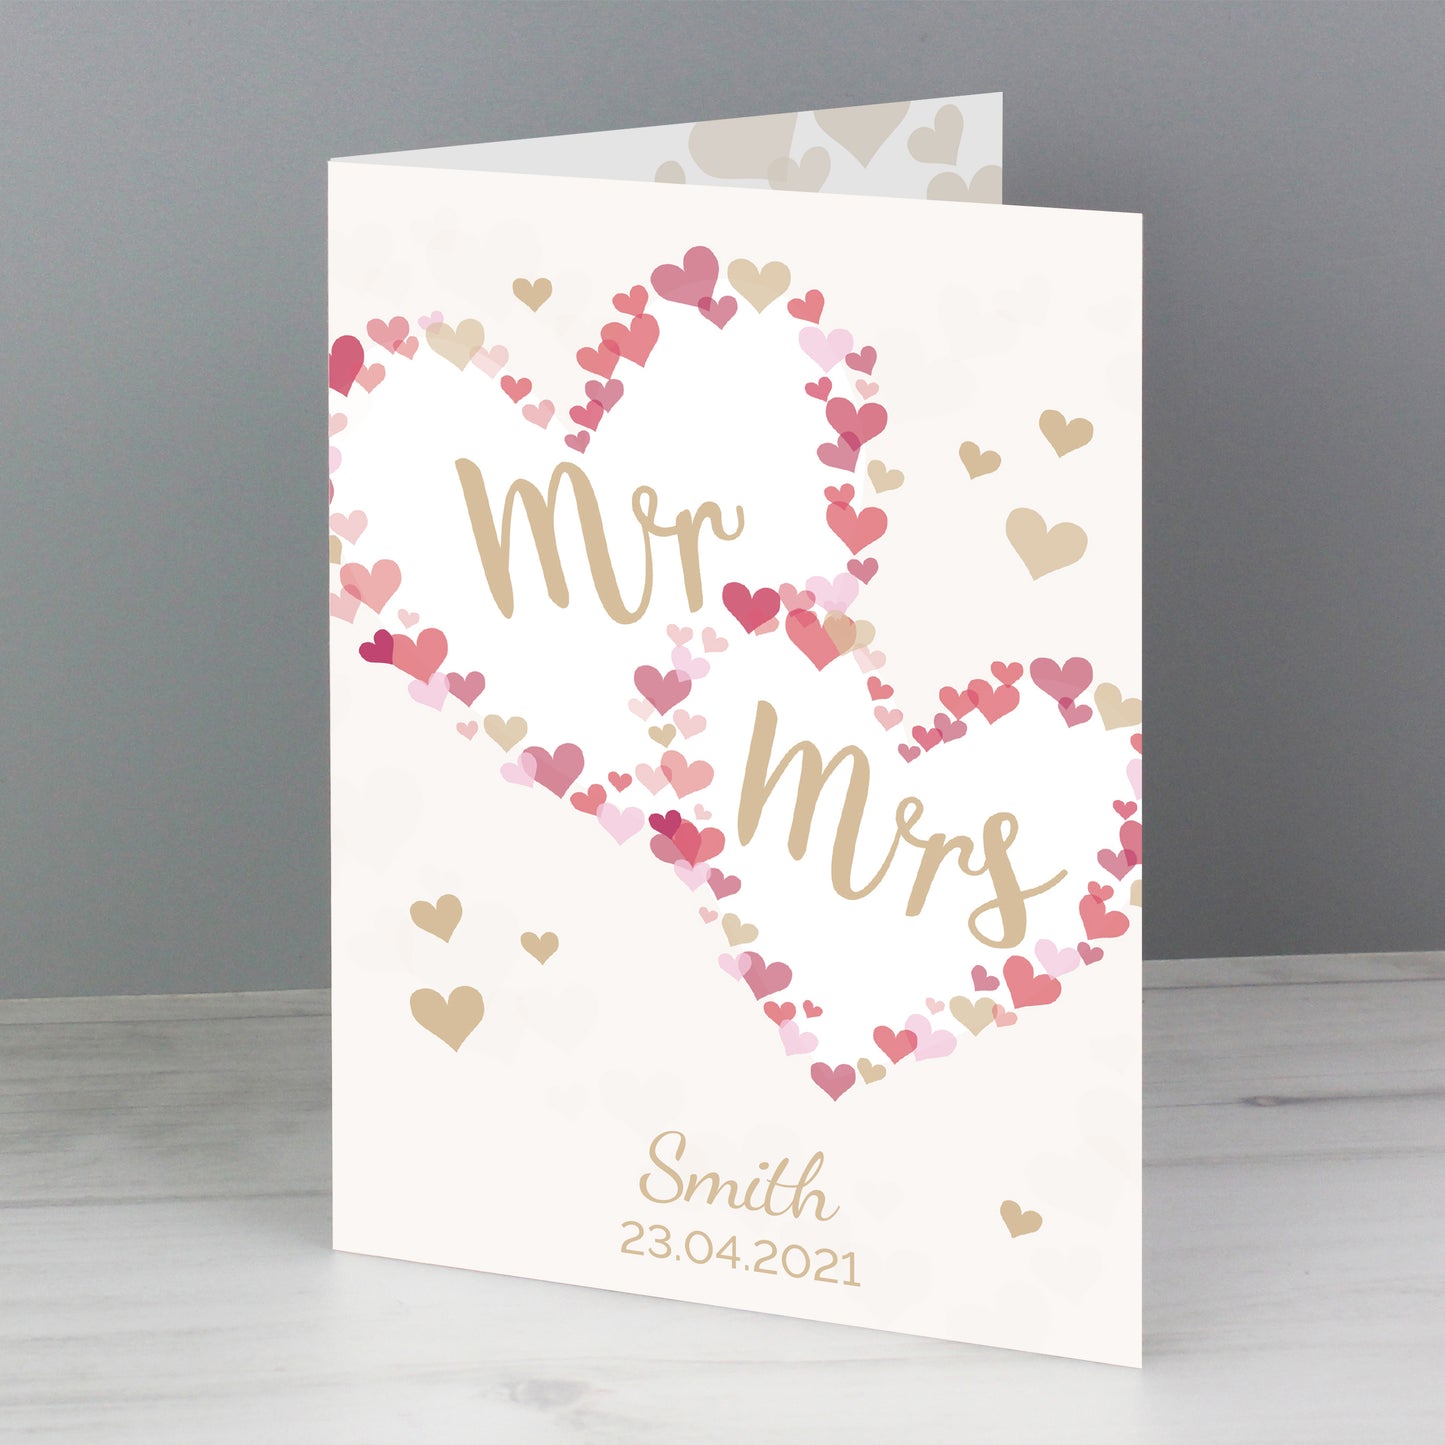 Personalised Mr & Mrs Confetti Hearts Wedding Card Add Any Name - Personalise It!